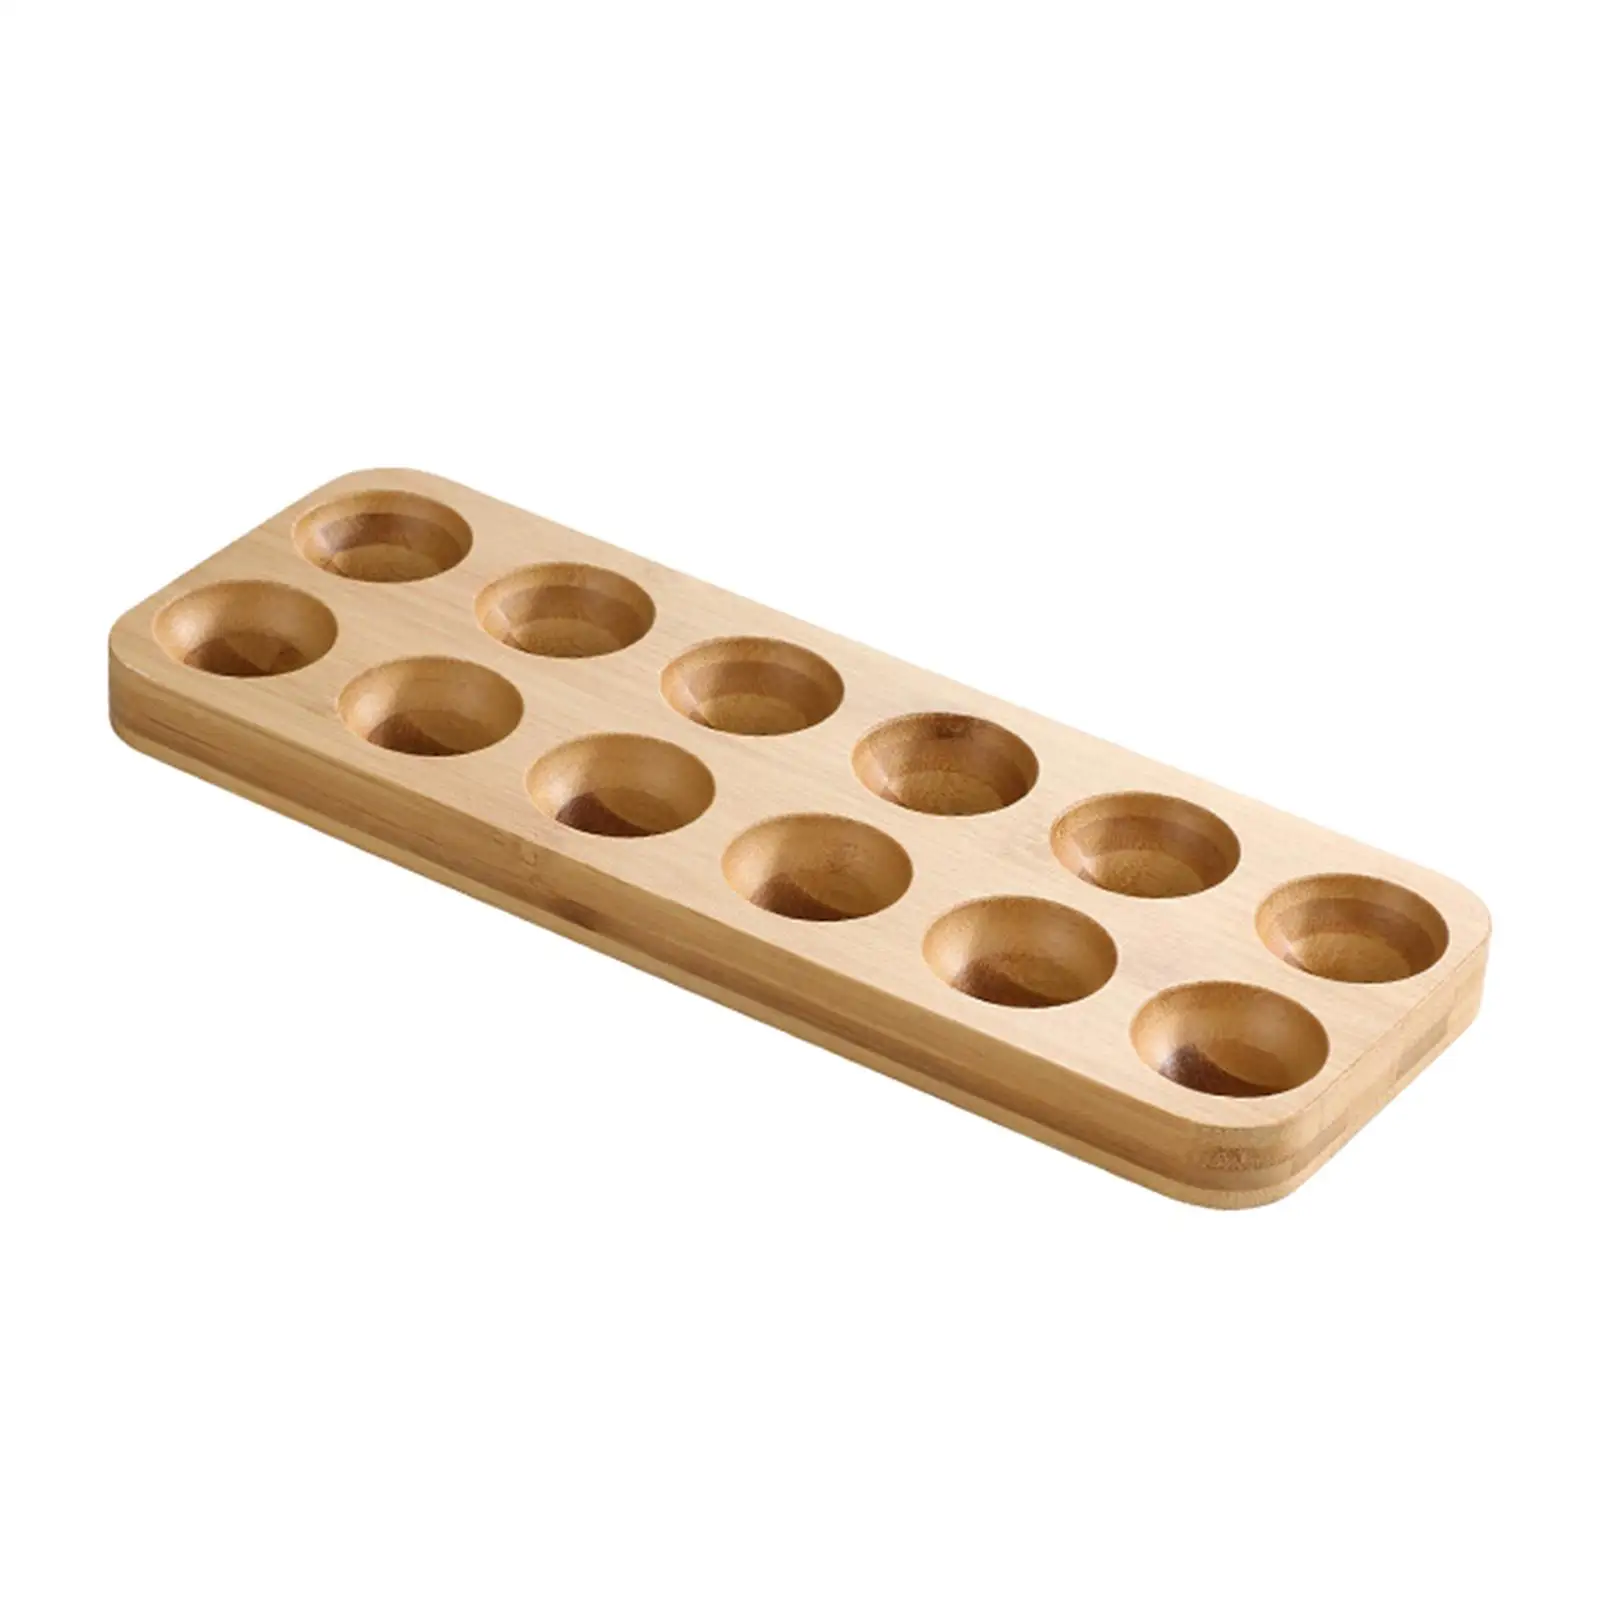 Wooden Egg Holder Counter Unique Gift Egg Container Rack Wood Egg Tray for Pantry Supermarket Cabinet Kitchens Accessories